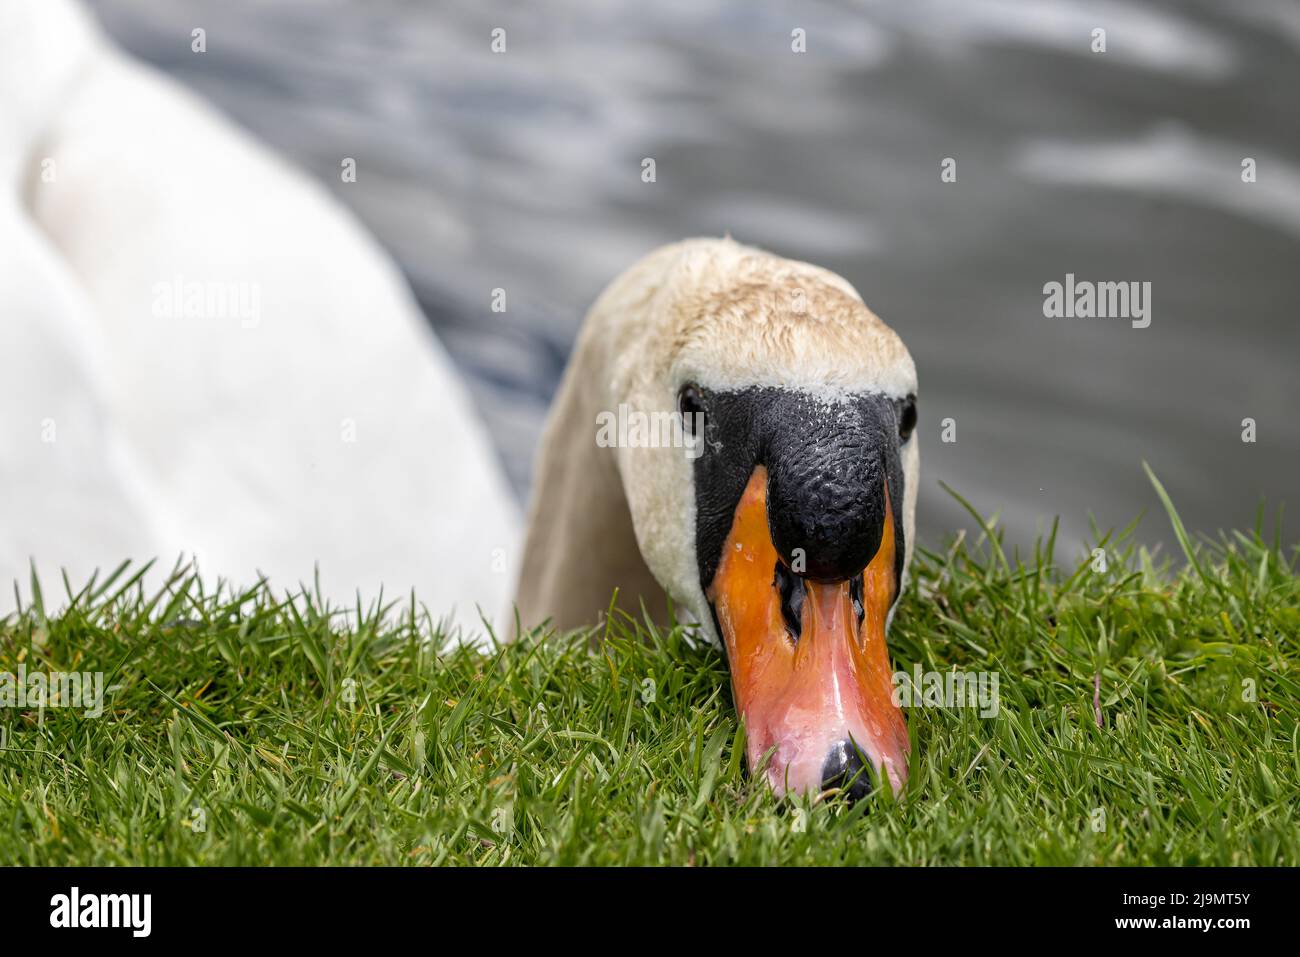 Eye level view of the head of an adult Mute Swan resting on grass at lake edge Stock Photo